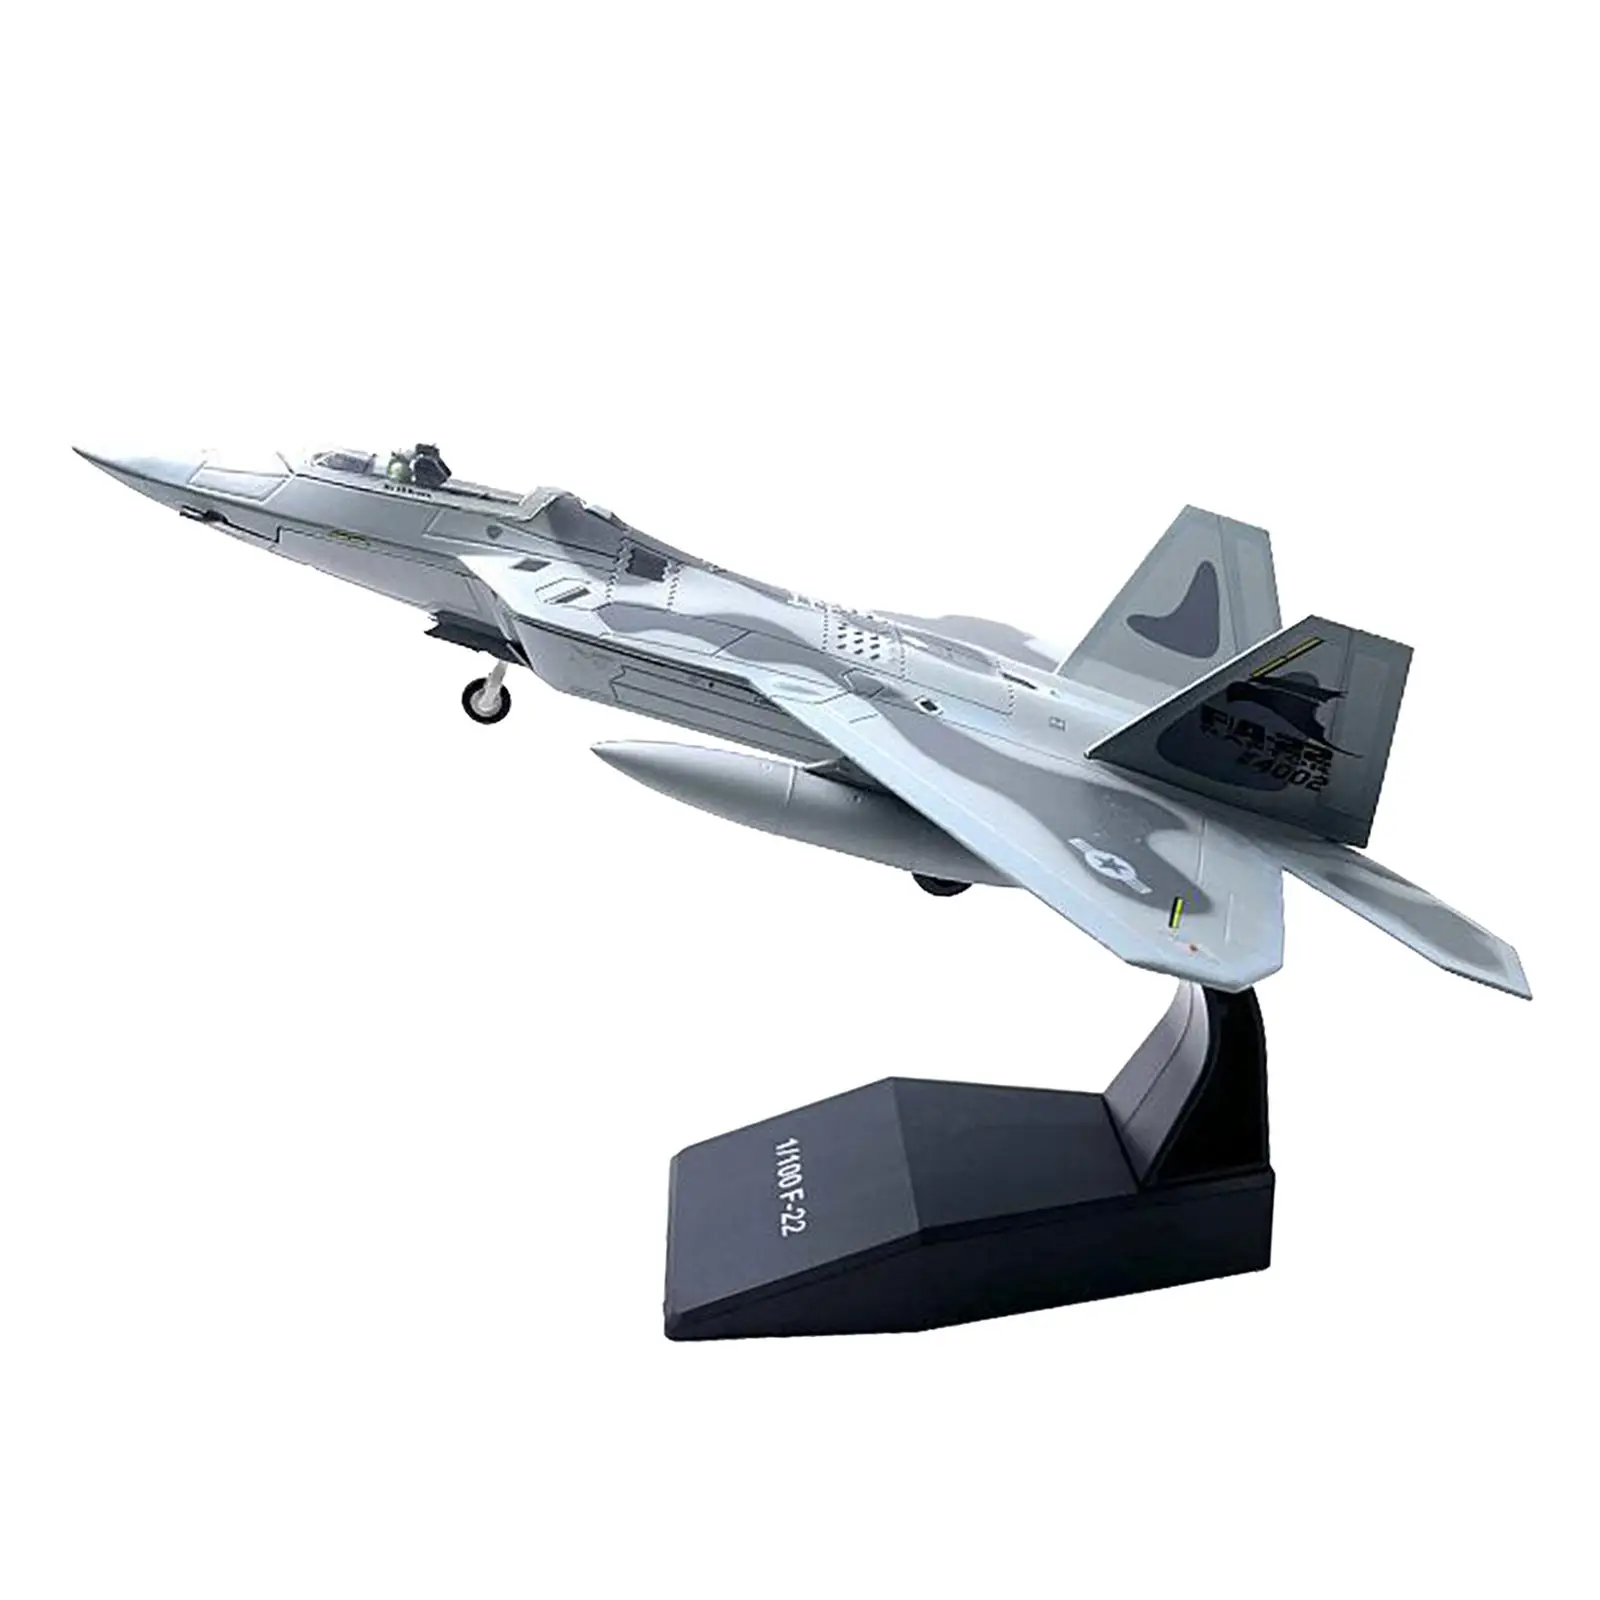 1/100 Scale Diecast Alloy F-22 Raptor Plane USA Airline Fighter Aircraft Model